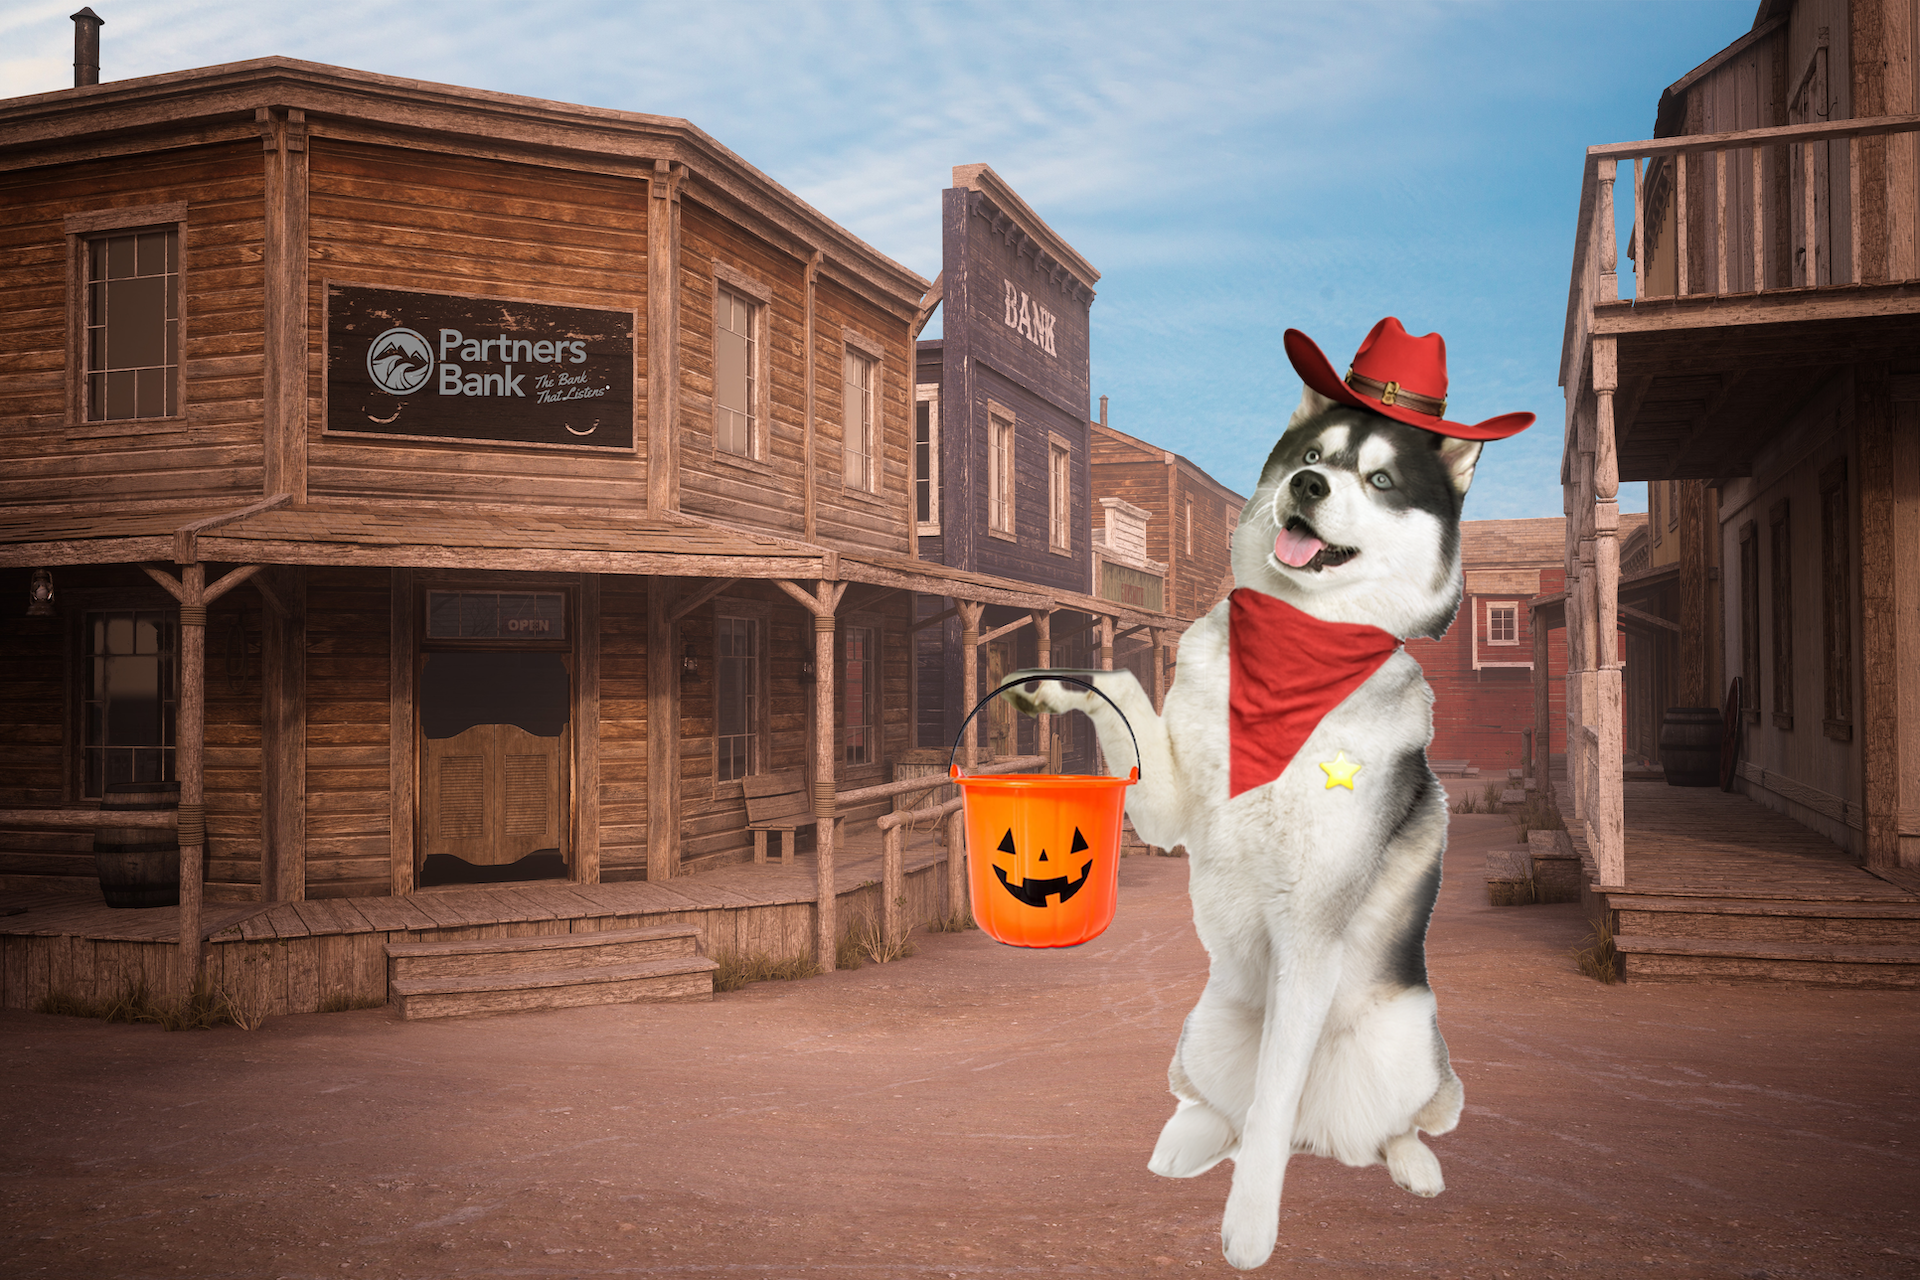 Cache the Dog dressed up in a western style town for halloween